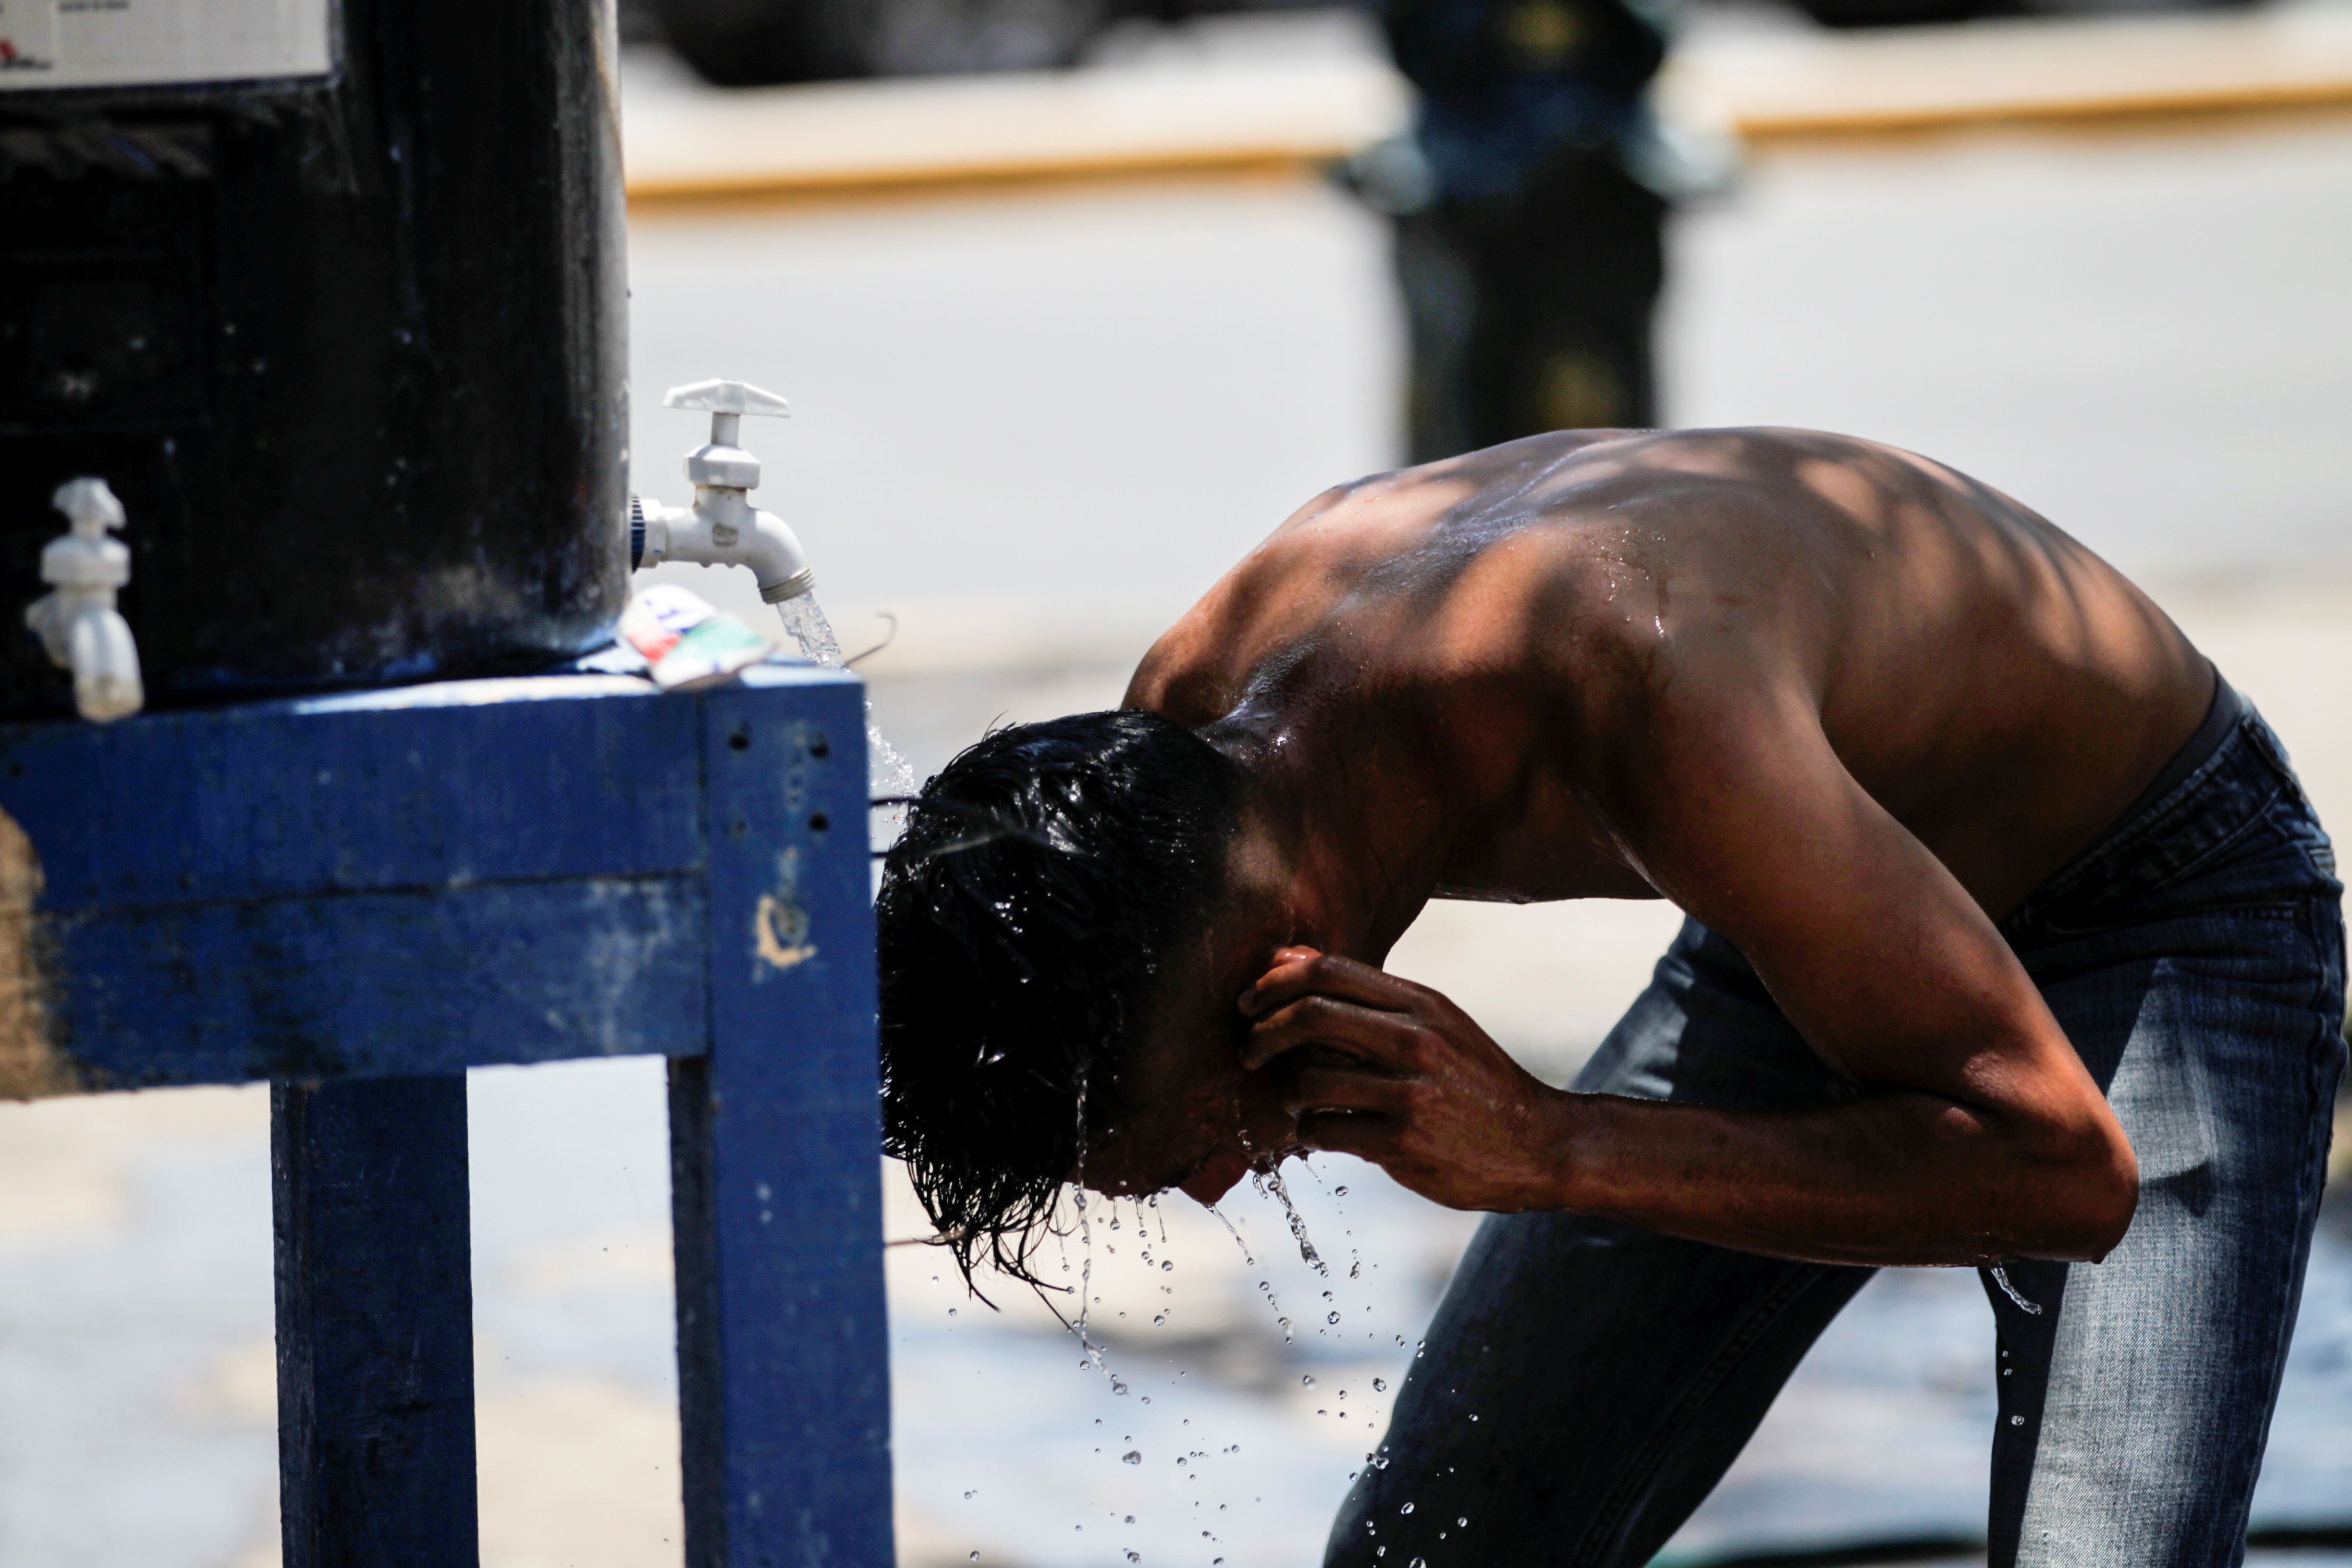 An asylum-seeking migrant youth, who was apprehended with their parents and returned to Mexico under Title 42 after crossing the border from Mexico into the U.S., bathes in a public square where hundreds of migrants live in tents, in Reynosa